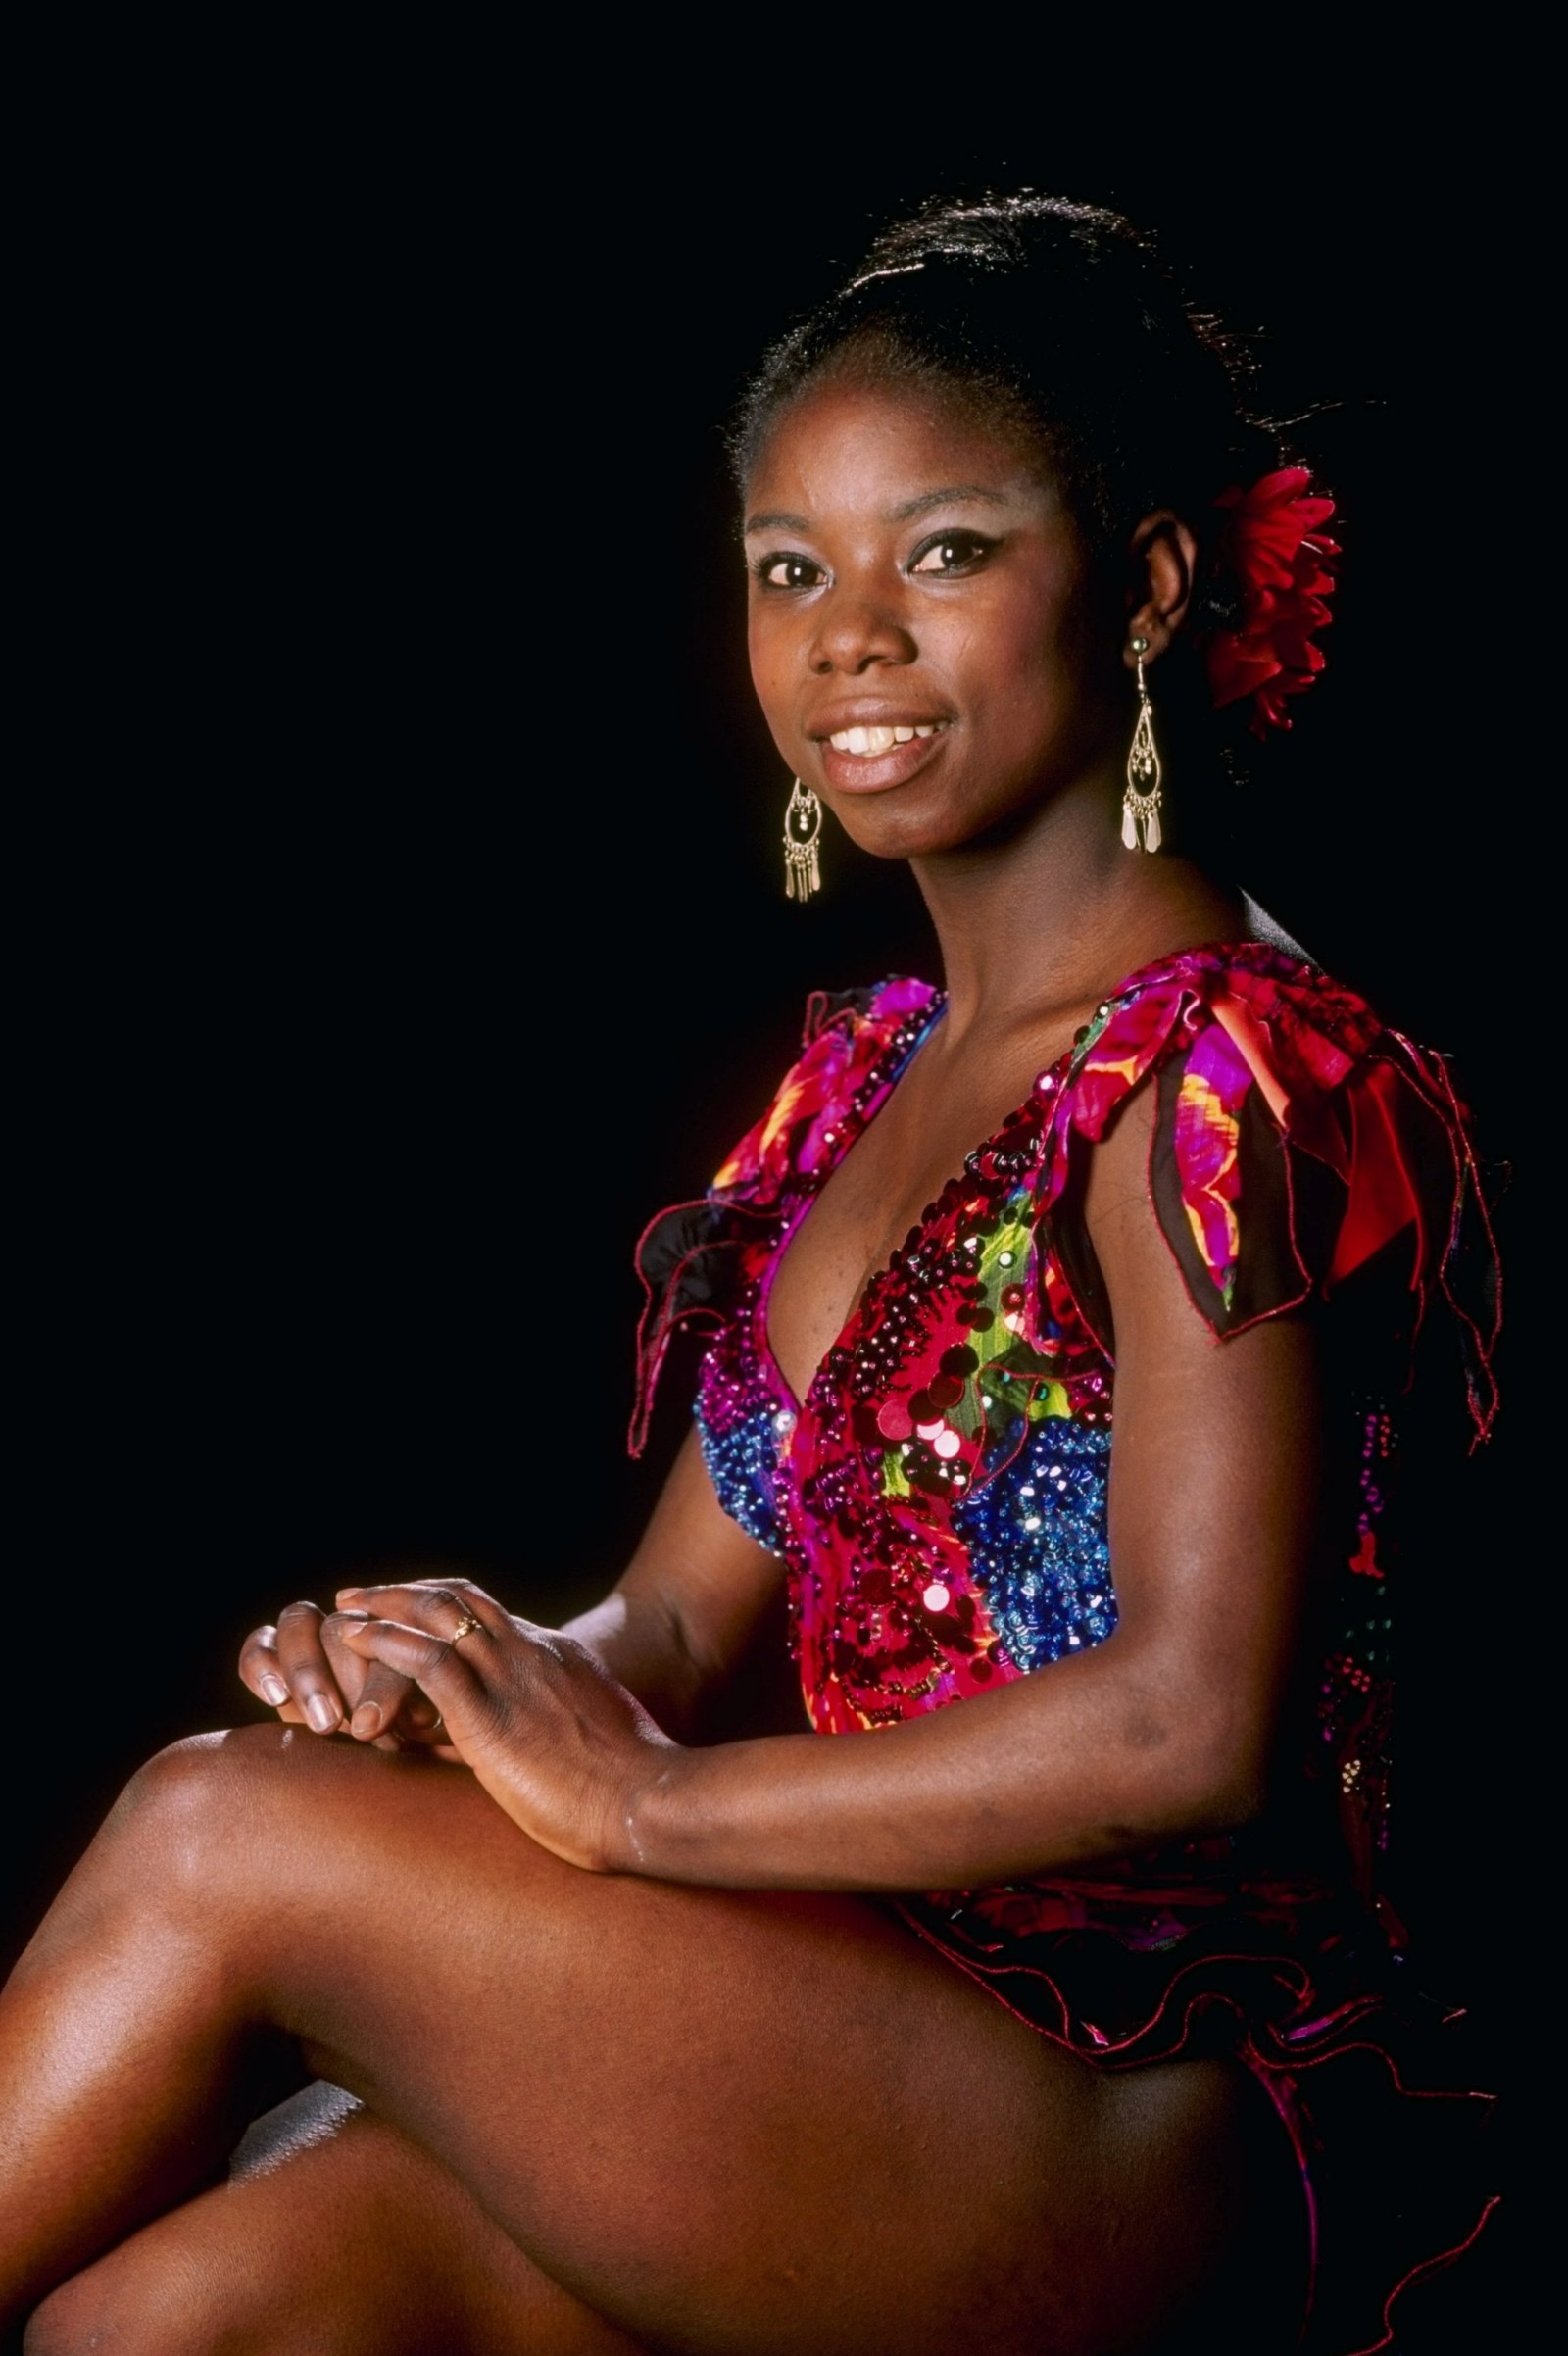 Here's some more throwback inspo from Surya Bonaly, three-time silver ...